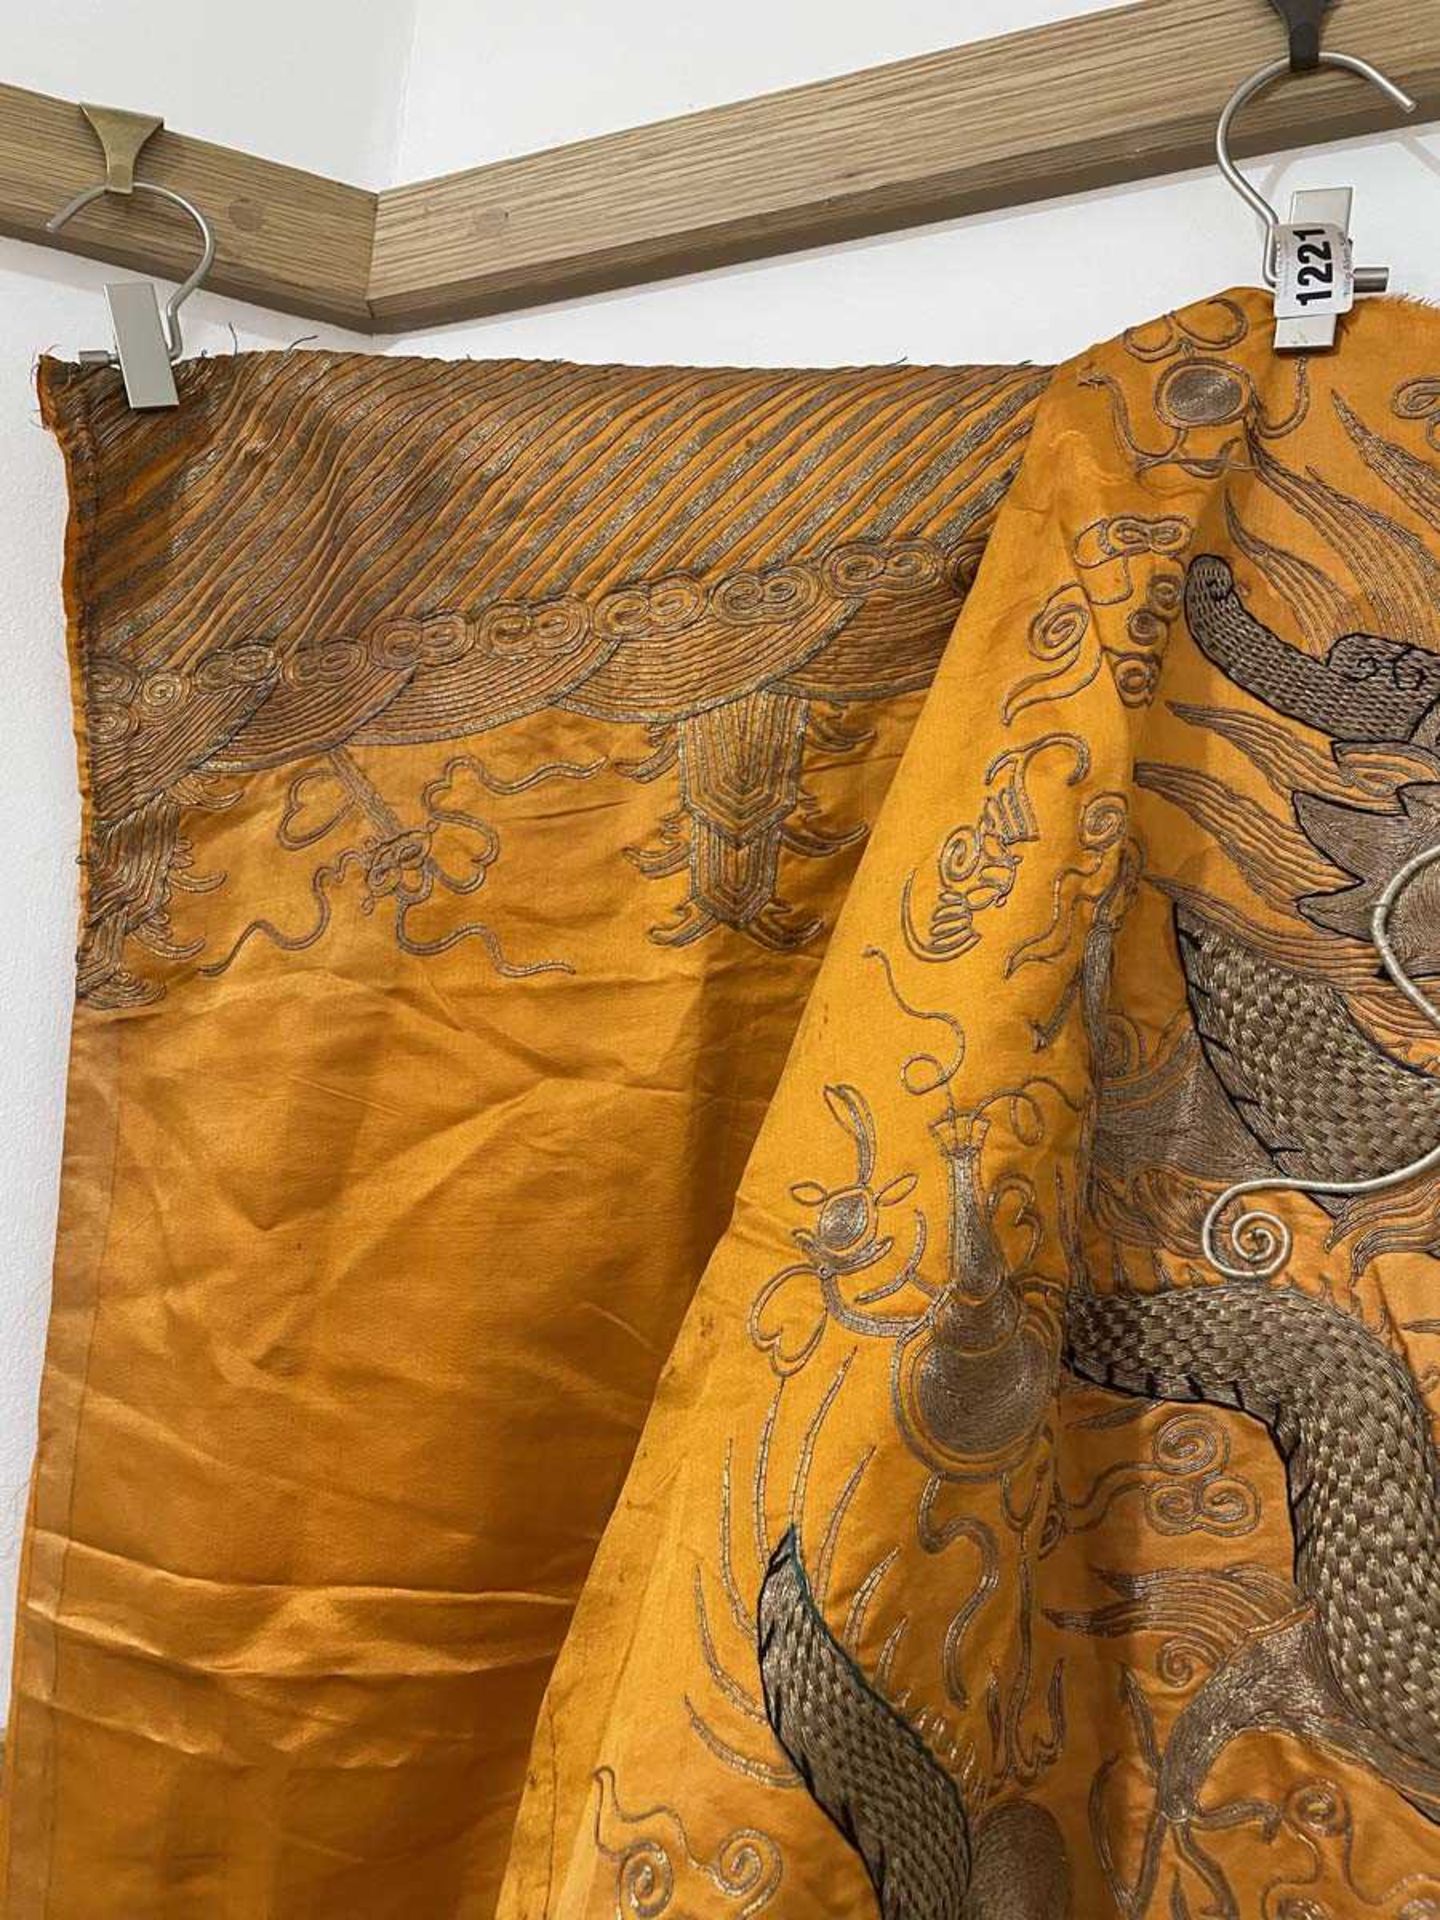 A Chinese robe section worked in gold coloured threads depicting dragons and a pagoda on an orange - Bild 9 aus 15